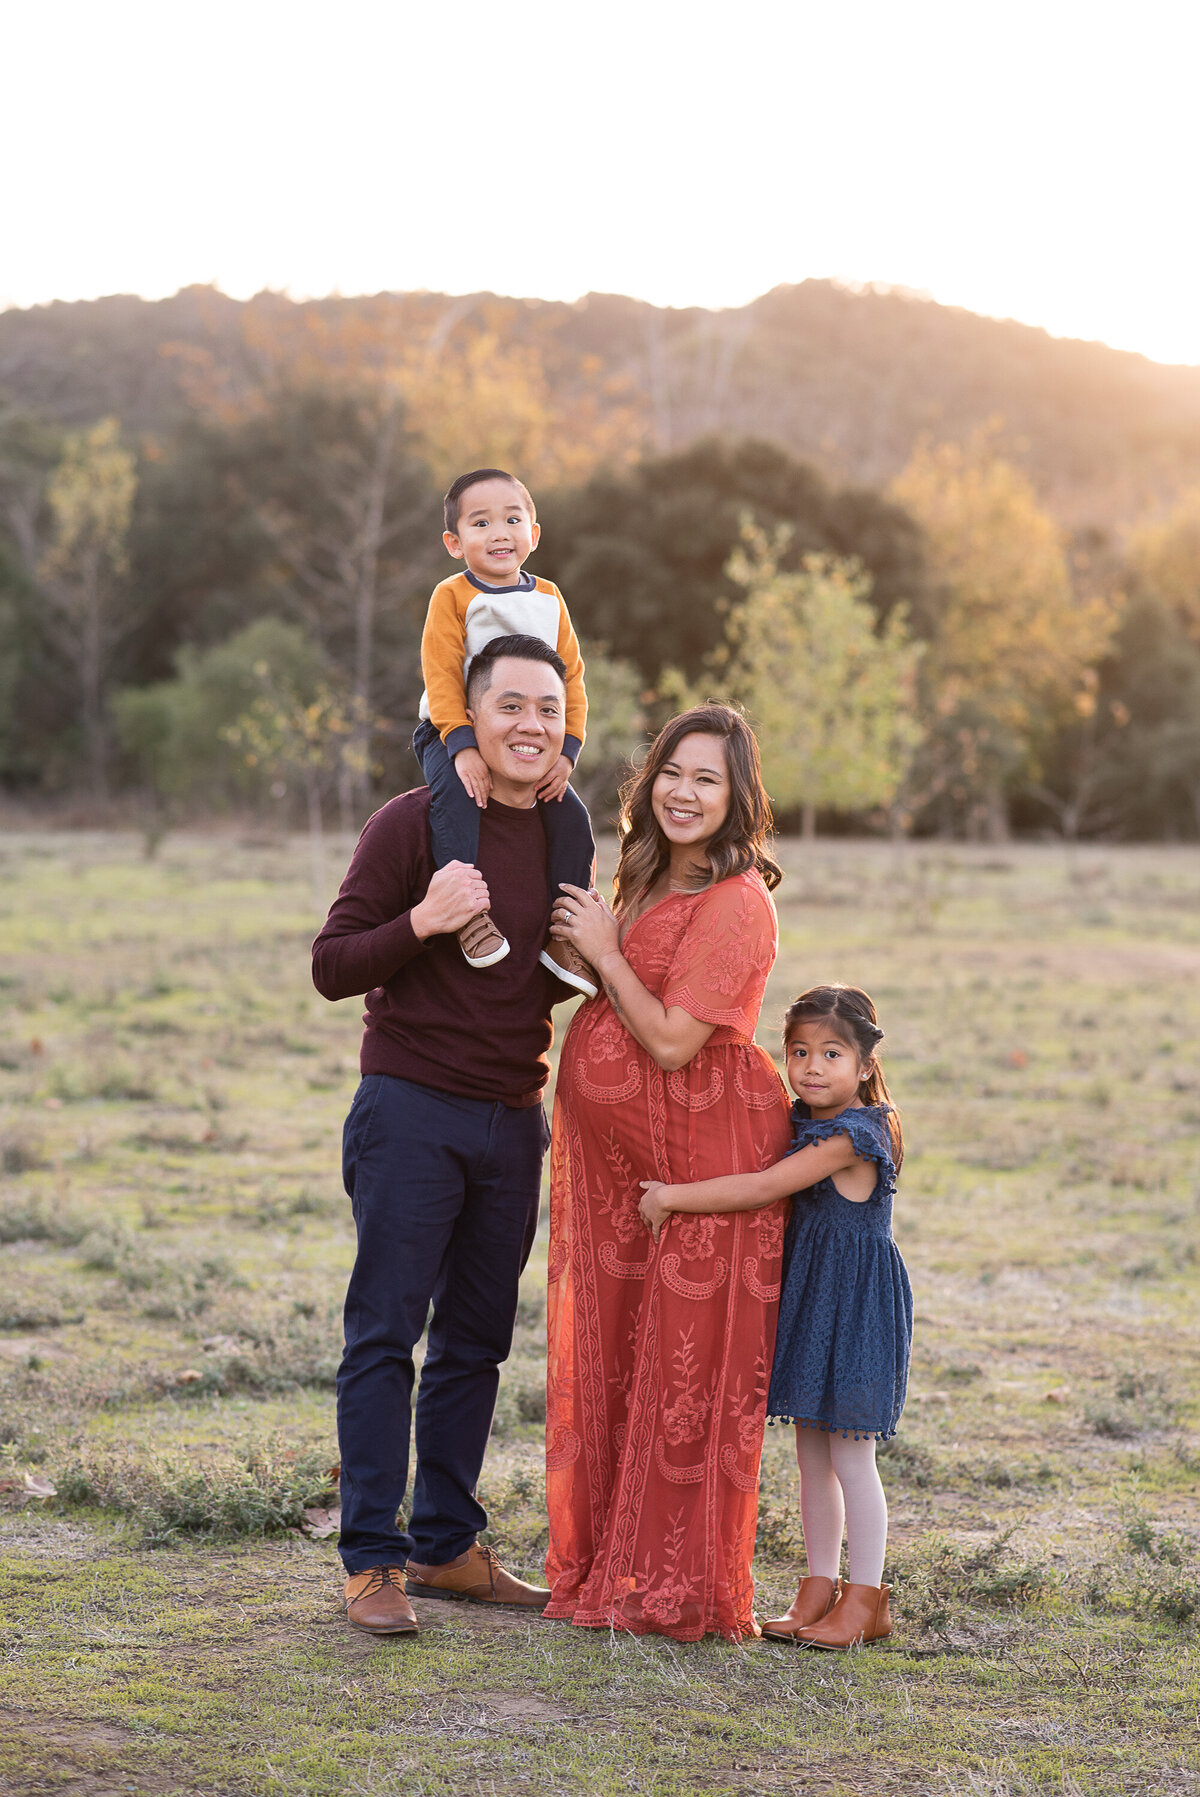 San Diego Maternity Photographer-family in field12